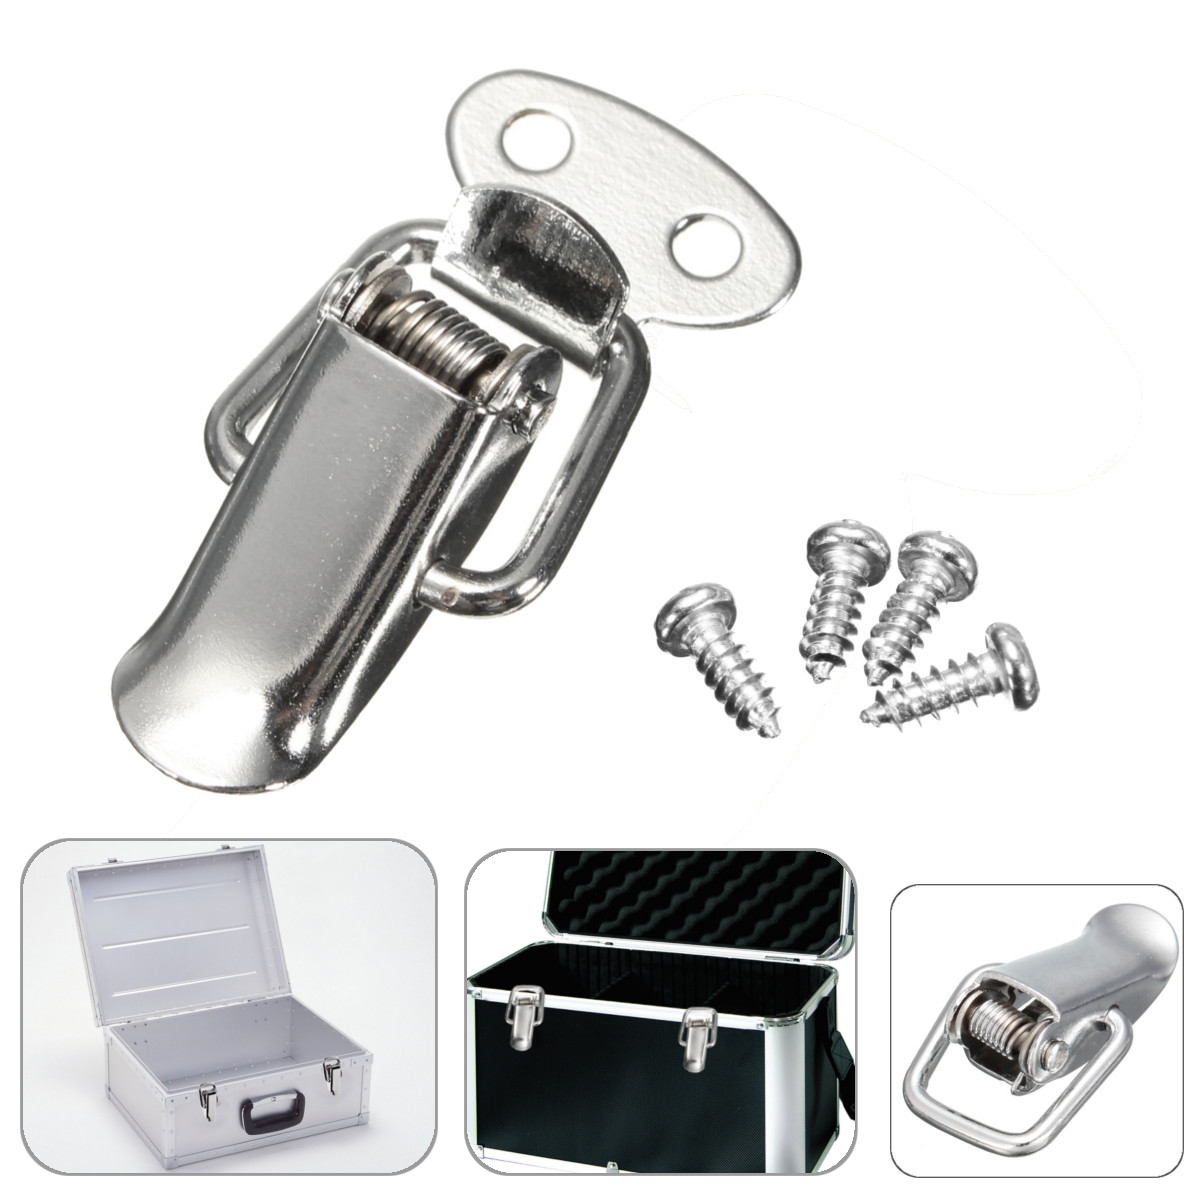 Hardware-Cabinet-Box-Case-Spring-Loaded-Latch-Catch-Toggle-Hasp-1043768